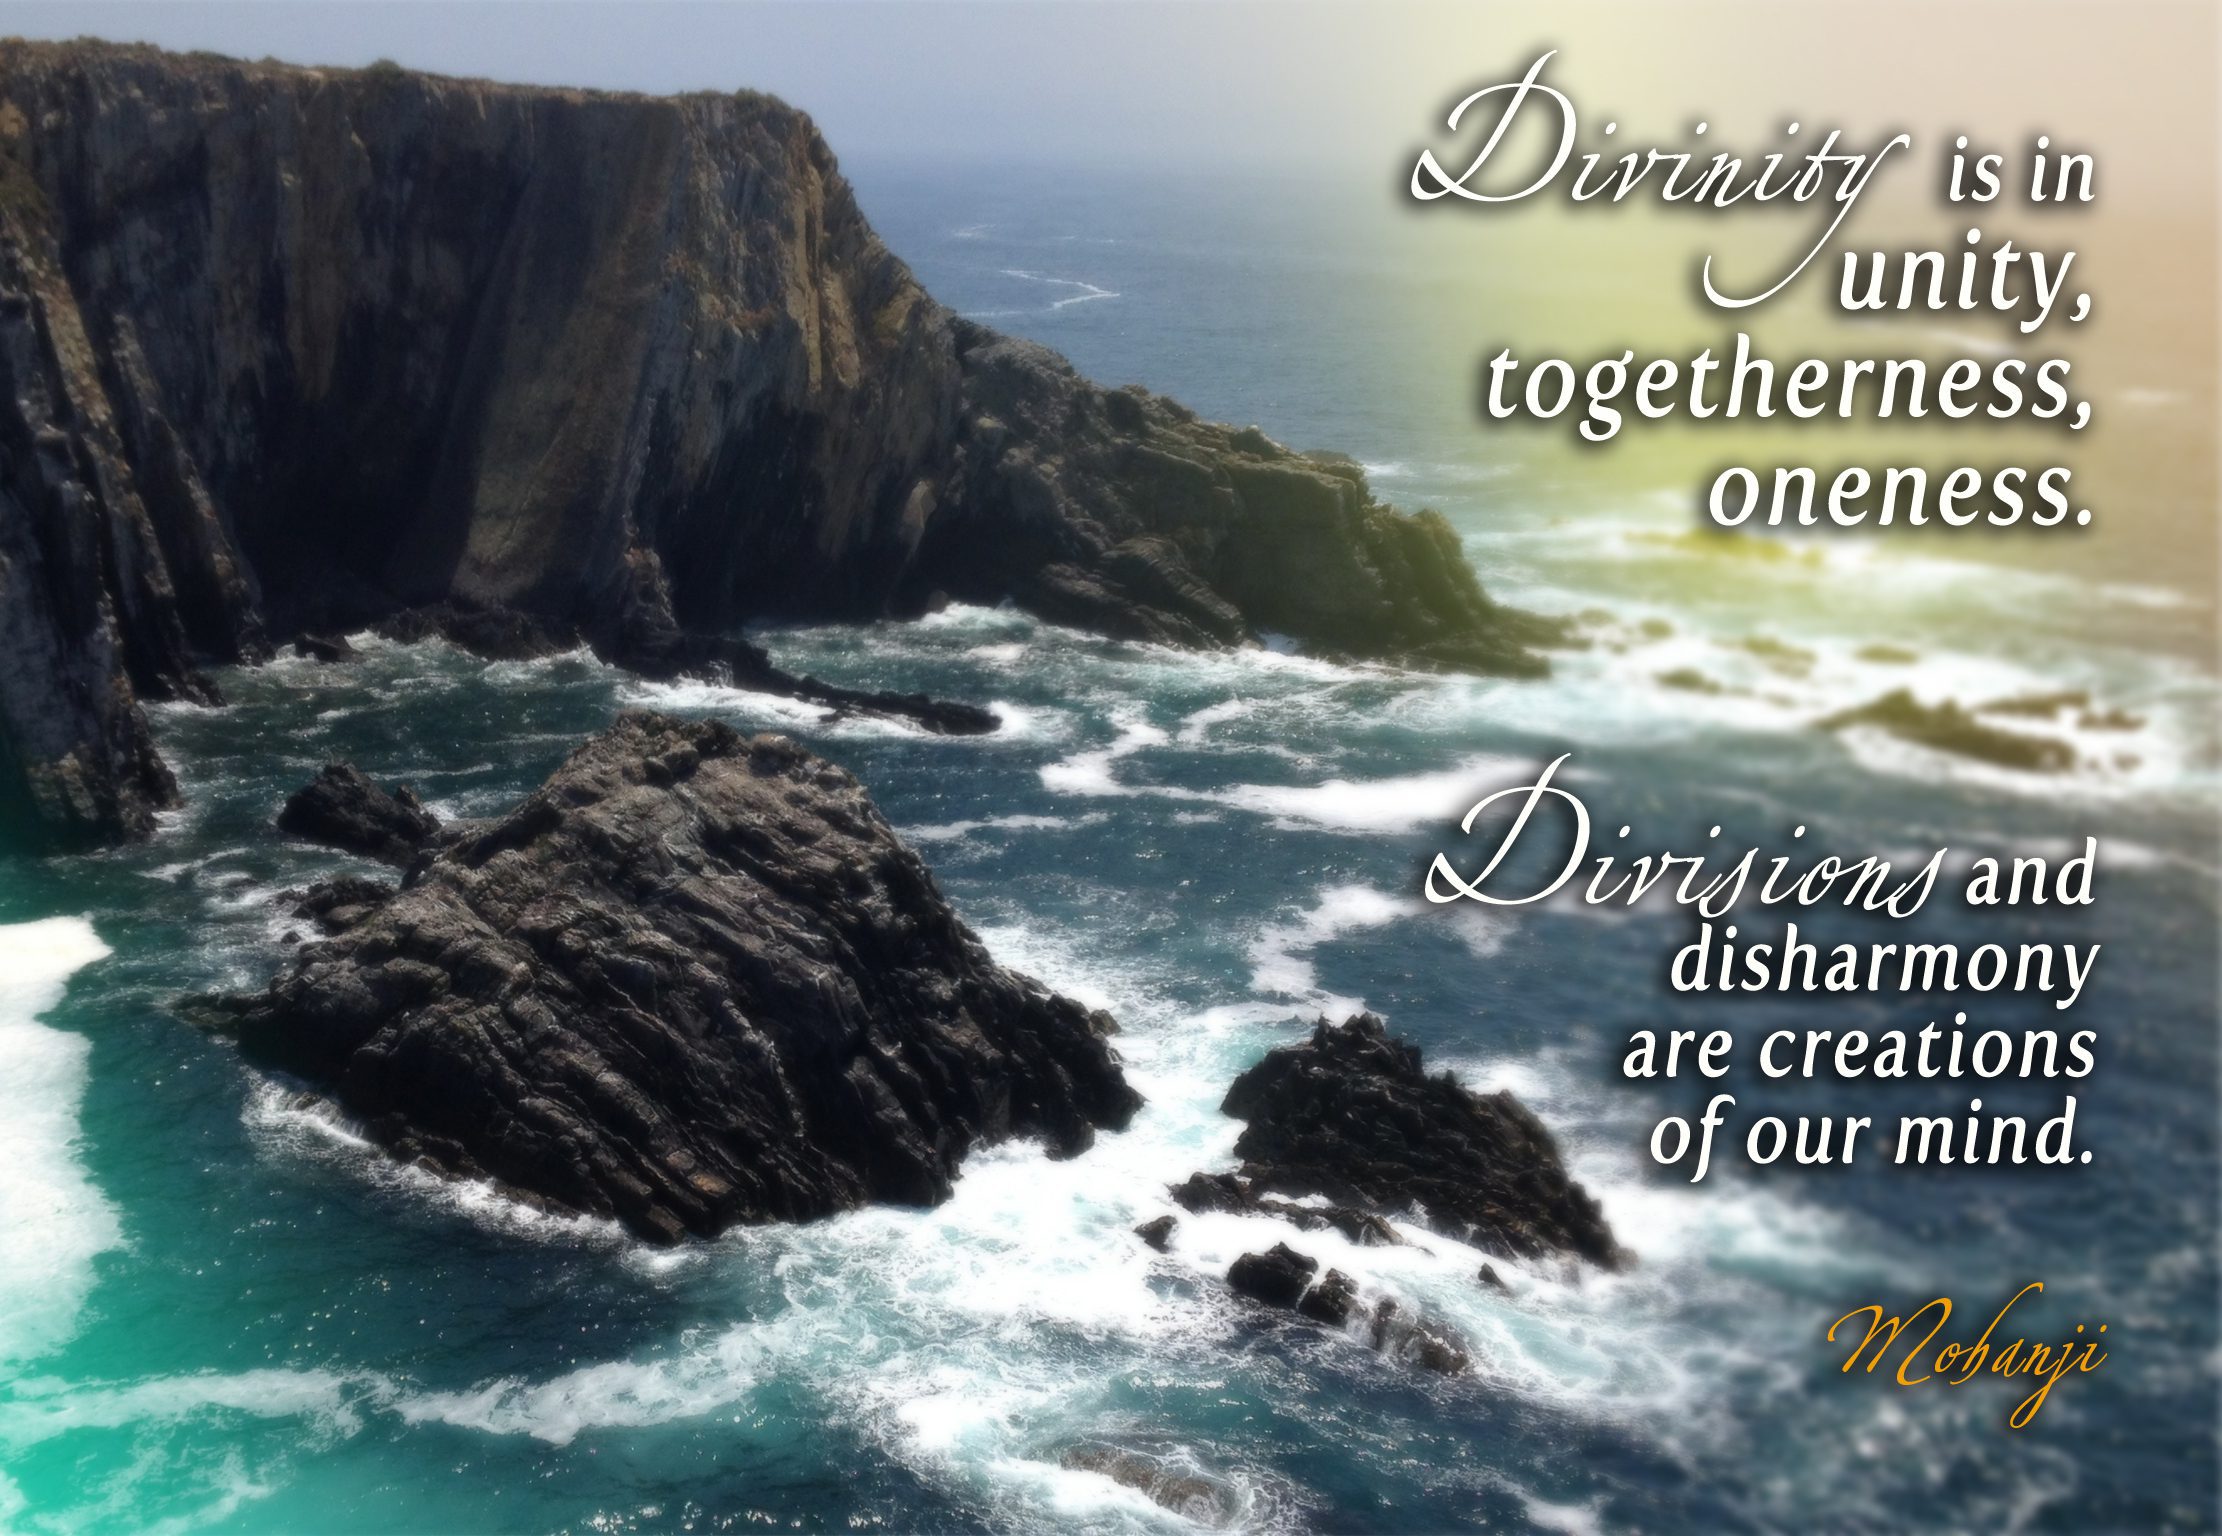 Mohanji quotes - Divinity is in unity, togetherness, oneness